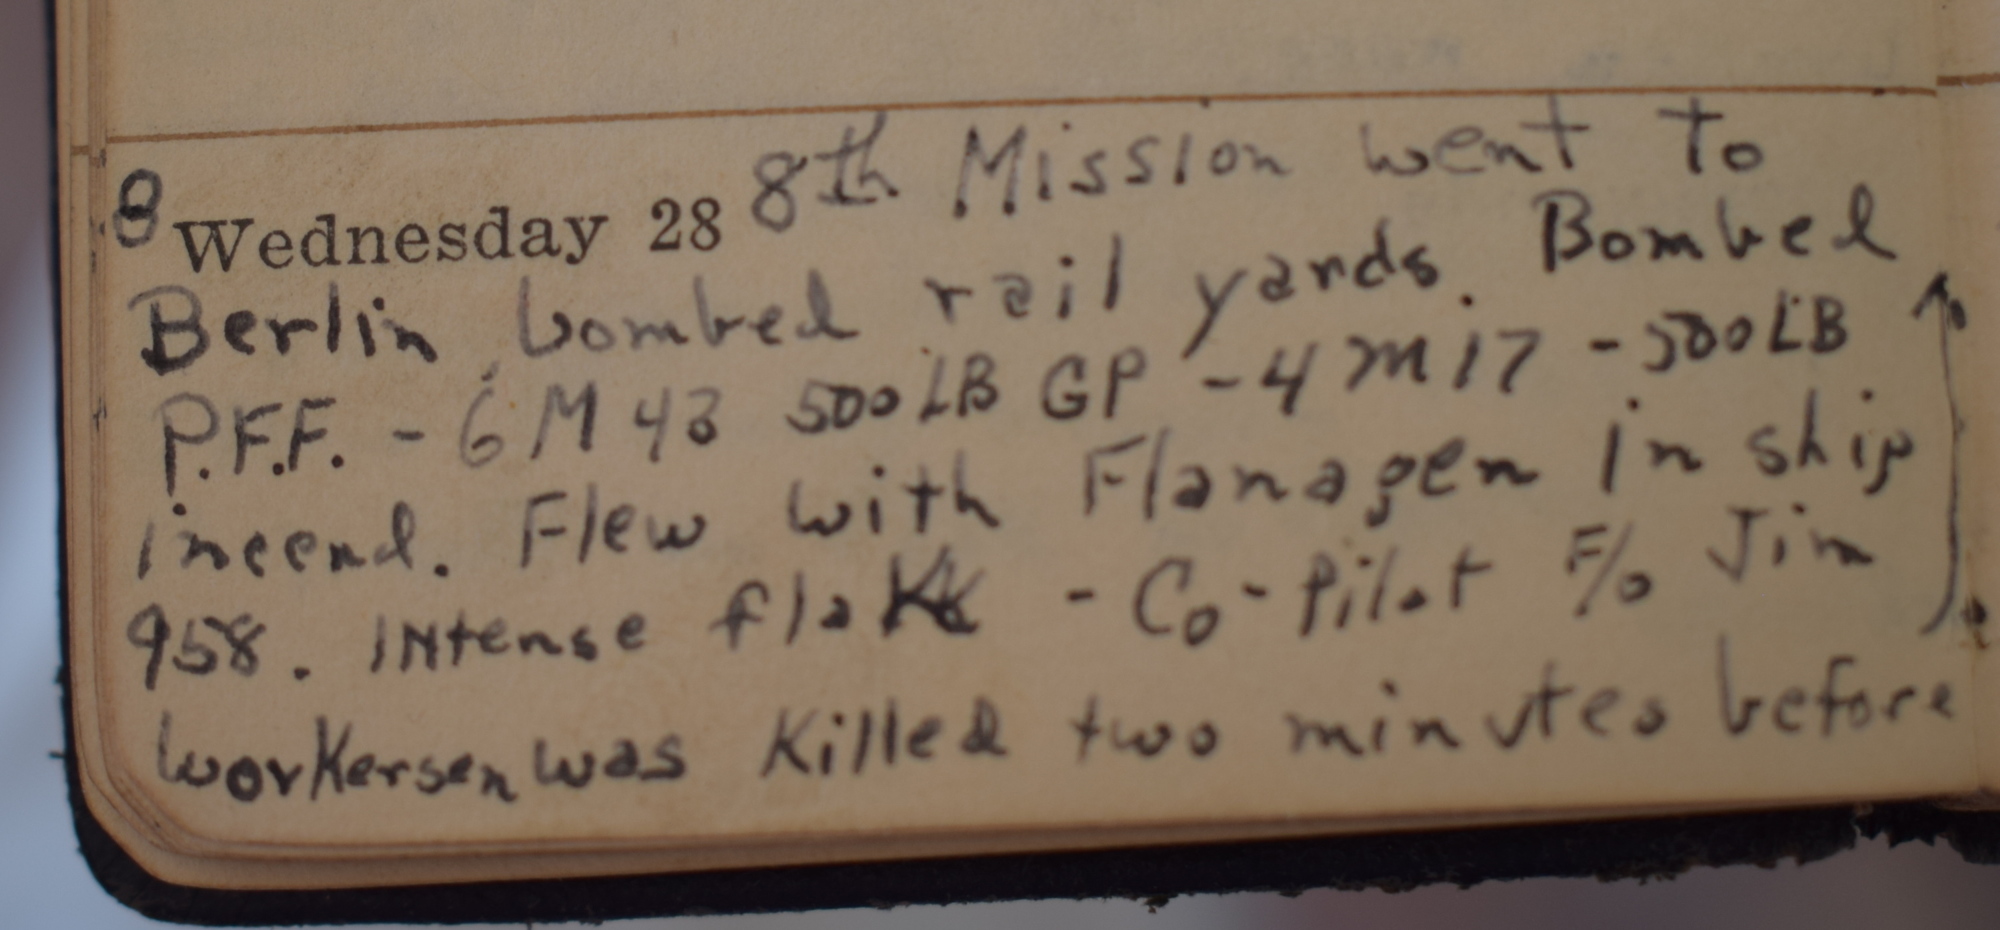 Arne Hansen made this entry in his diary the day his copilot was killed.